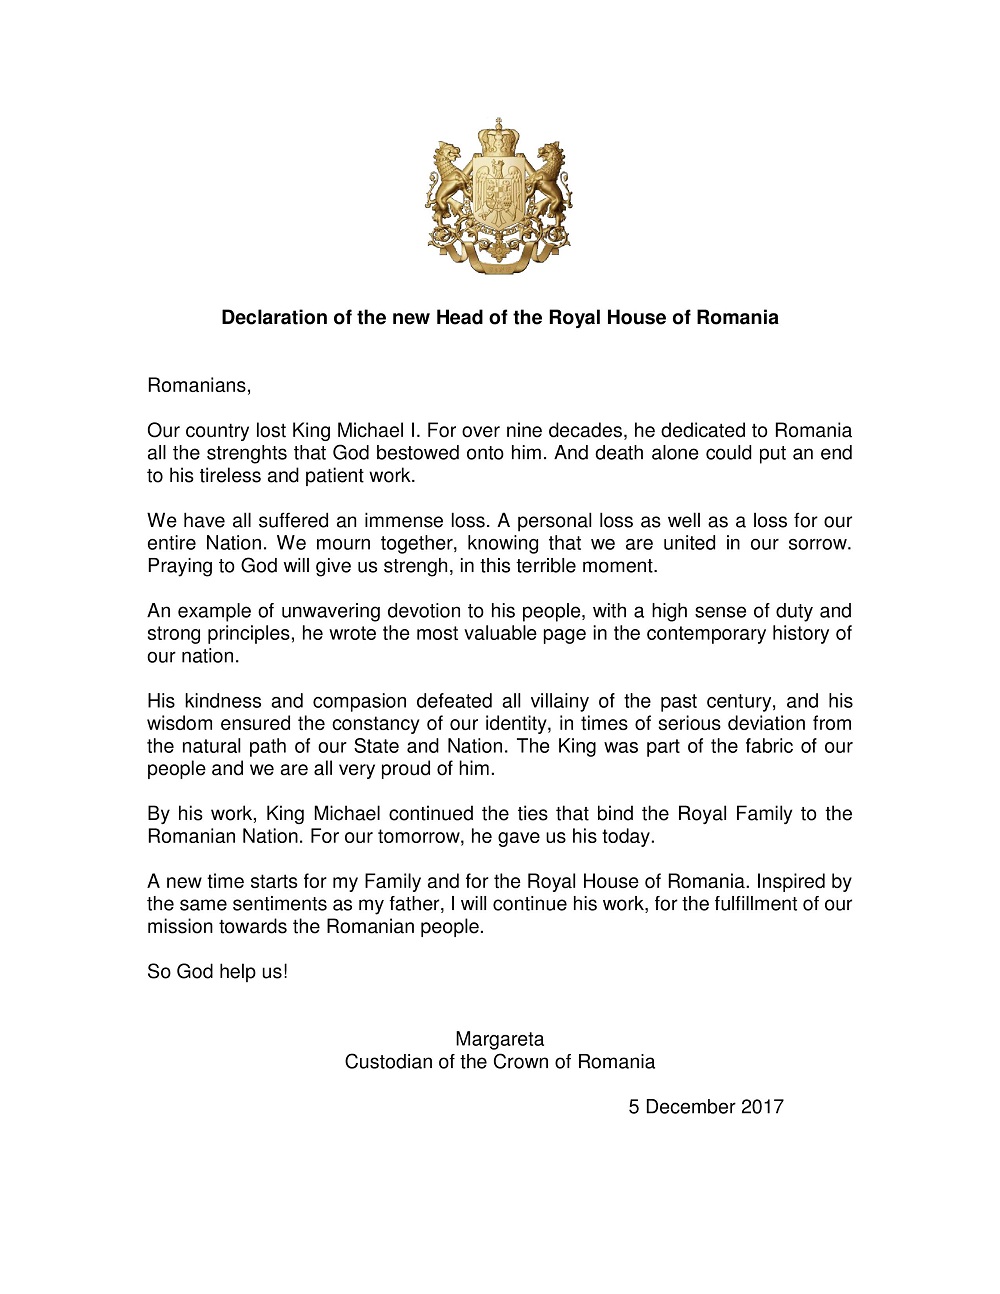 Declaration-of-the-new-Head-of-The-Royal-House-of-Romania-E.jpg